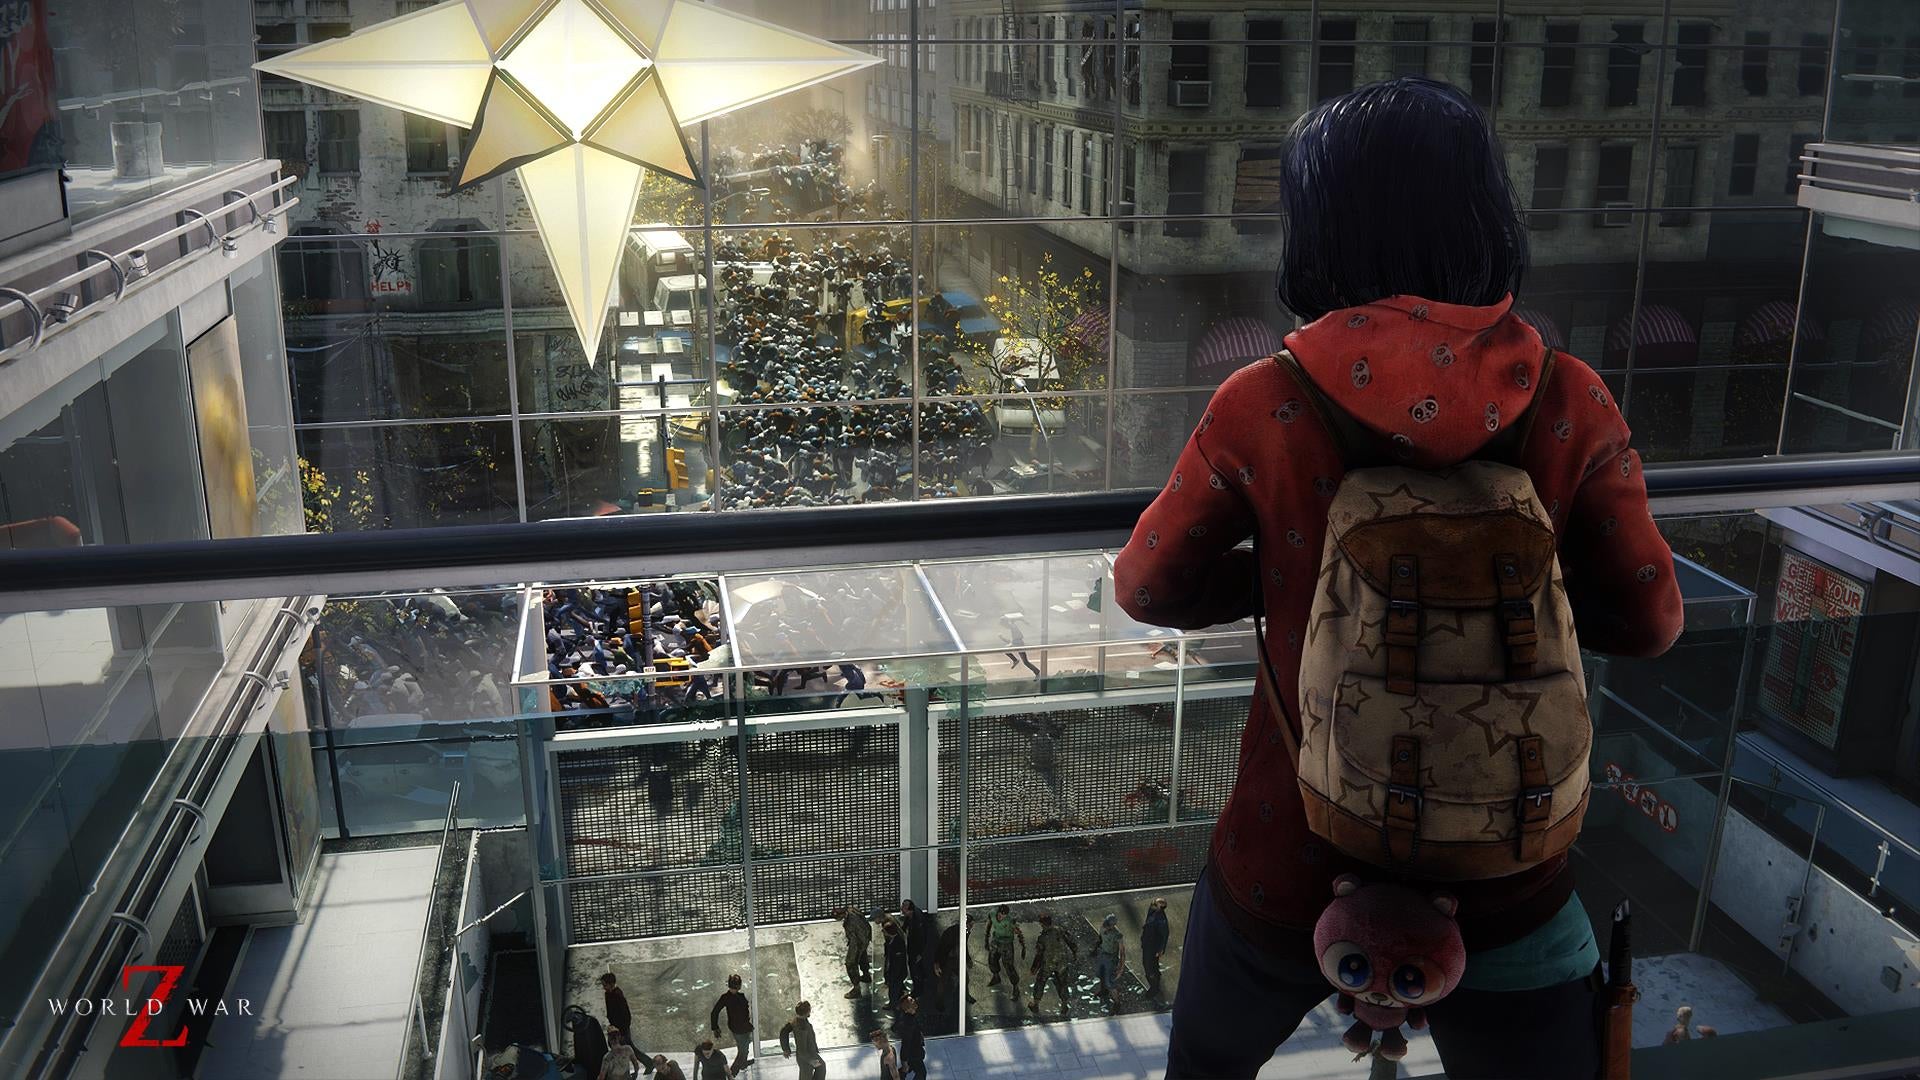 Image for World War Z sells 1 million copies in a week